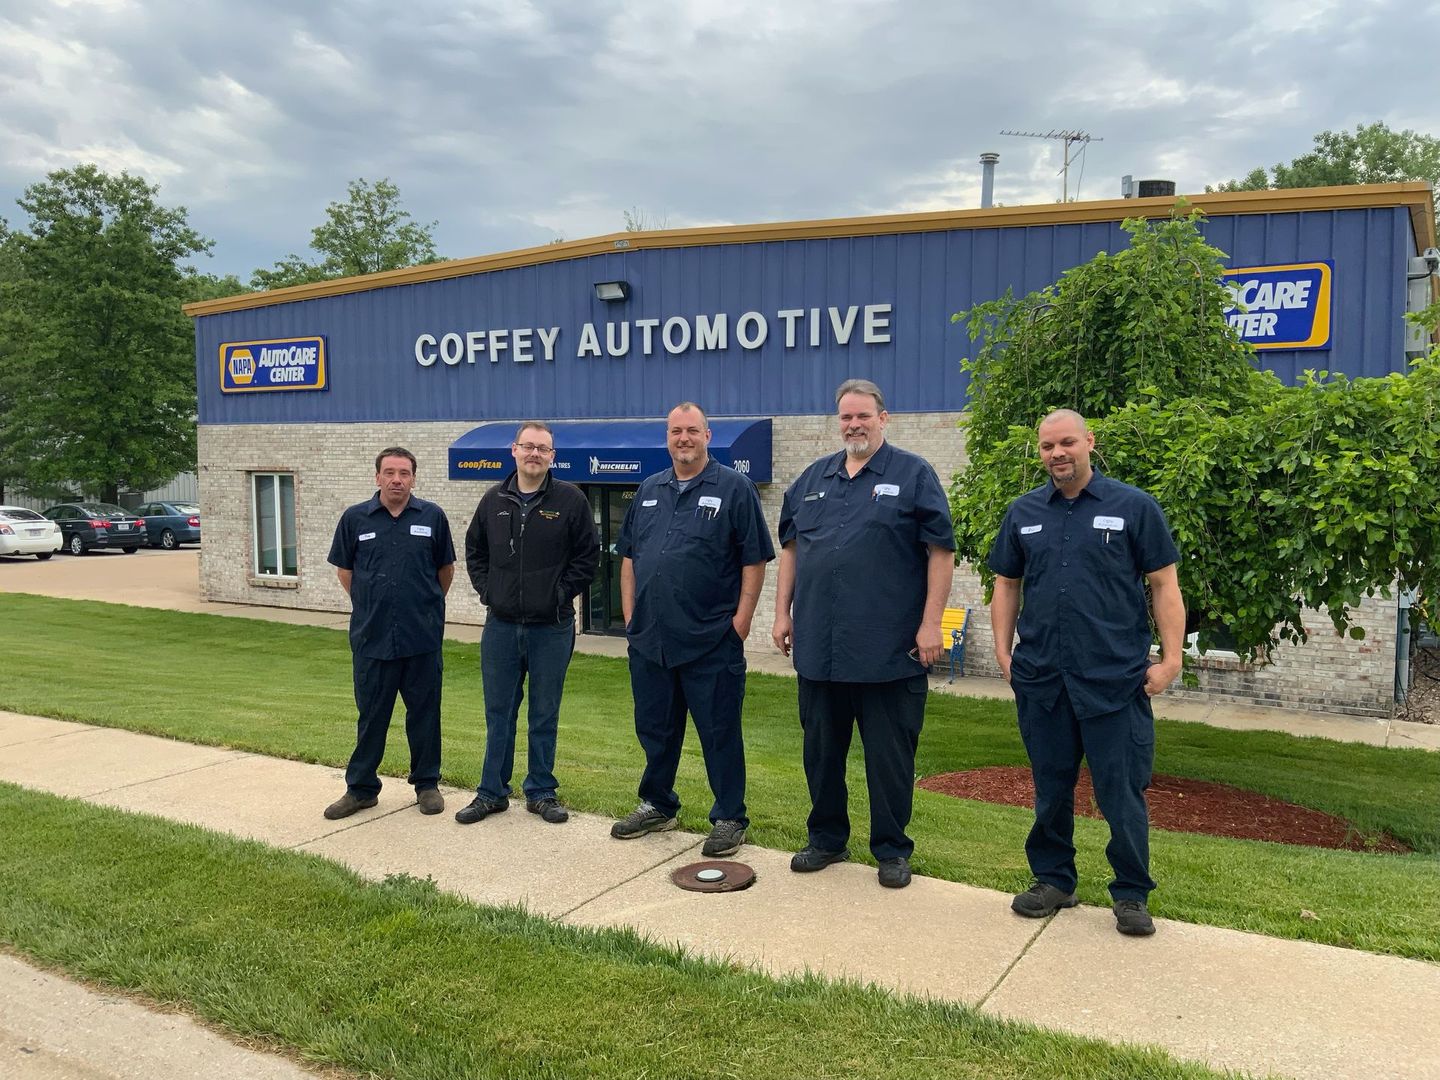 The Team in St.Charles, MO at Coffey Automotive